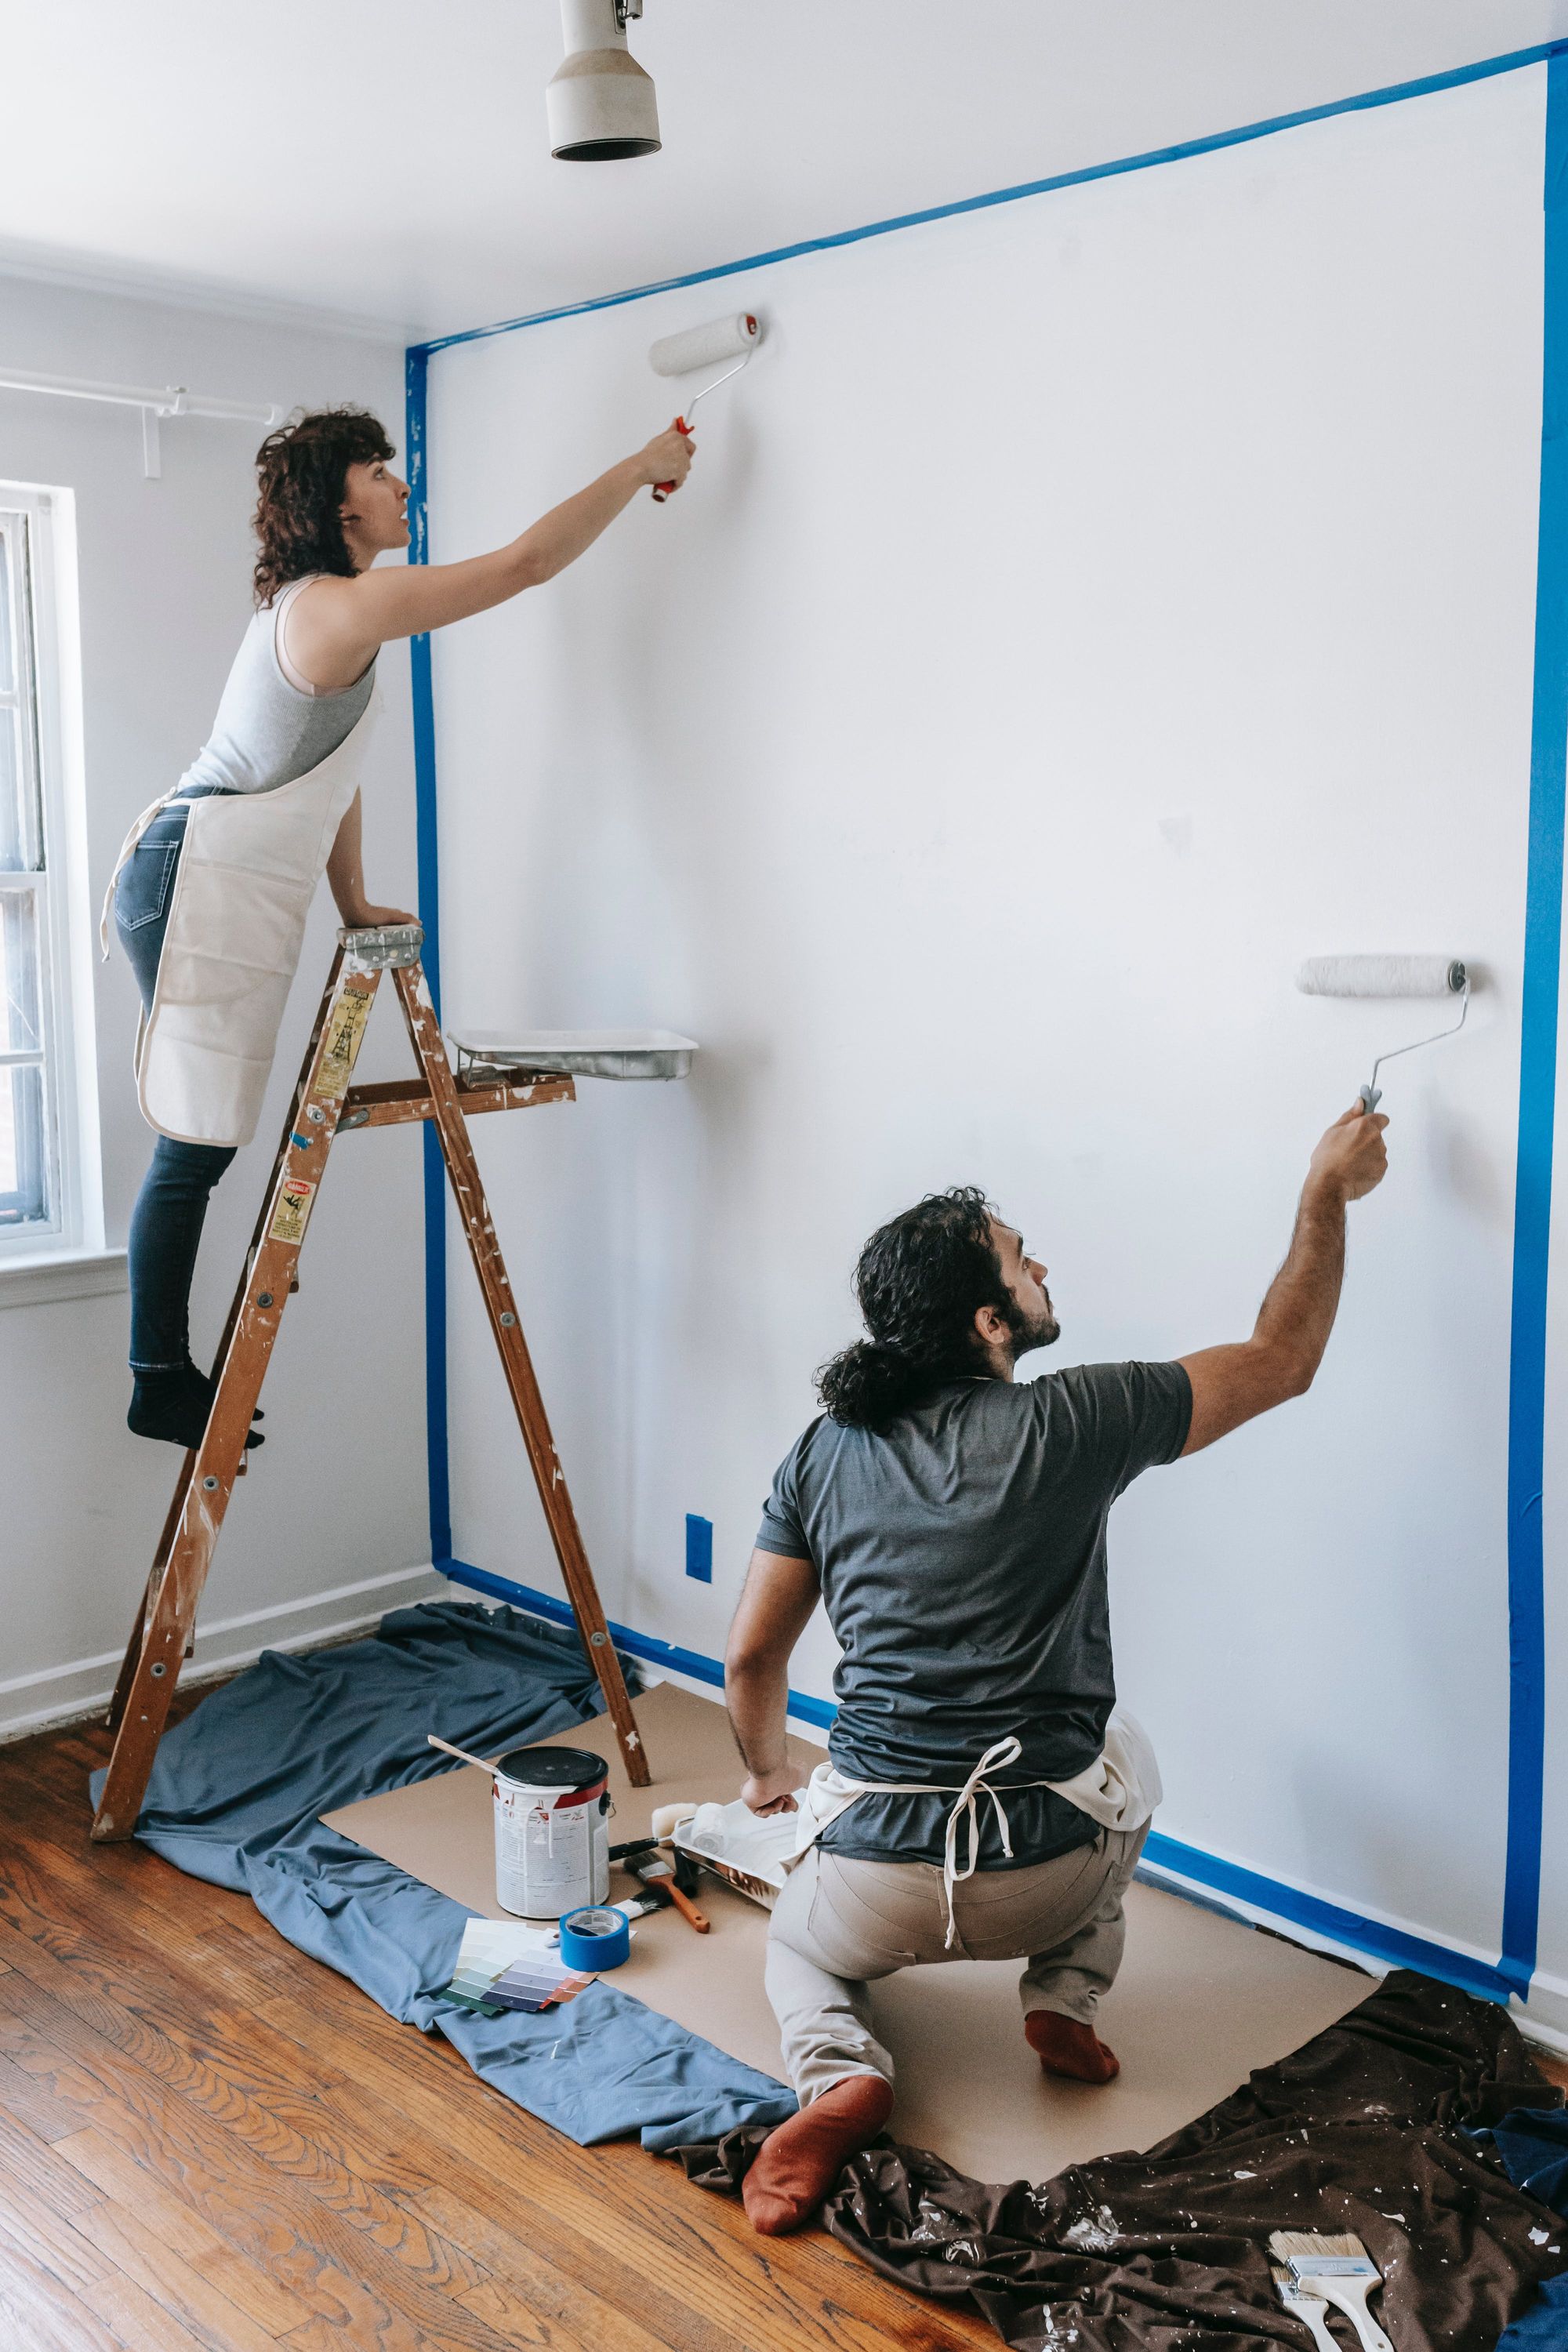 Questions to Ask When Hiring Home Painting Contractors